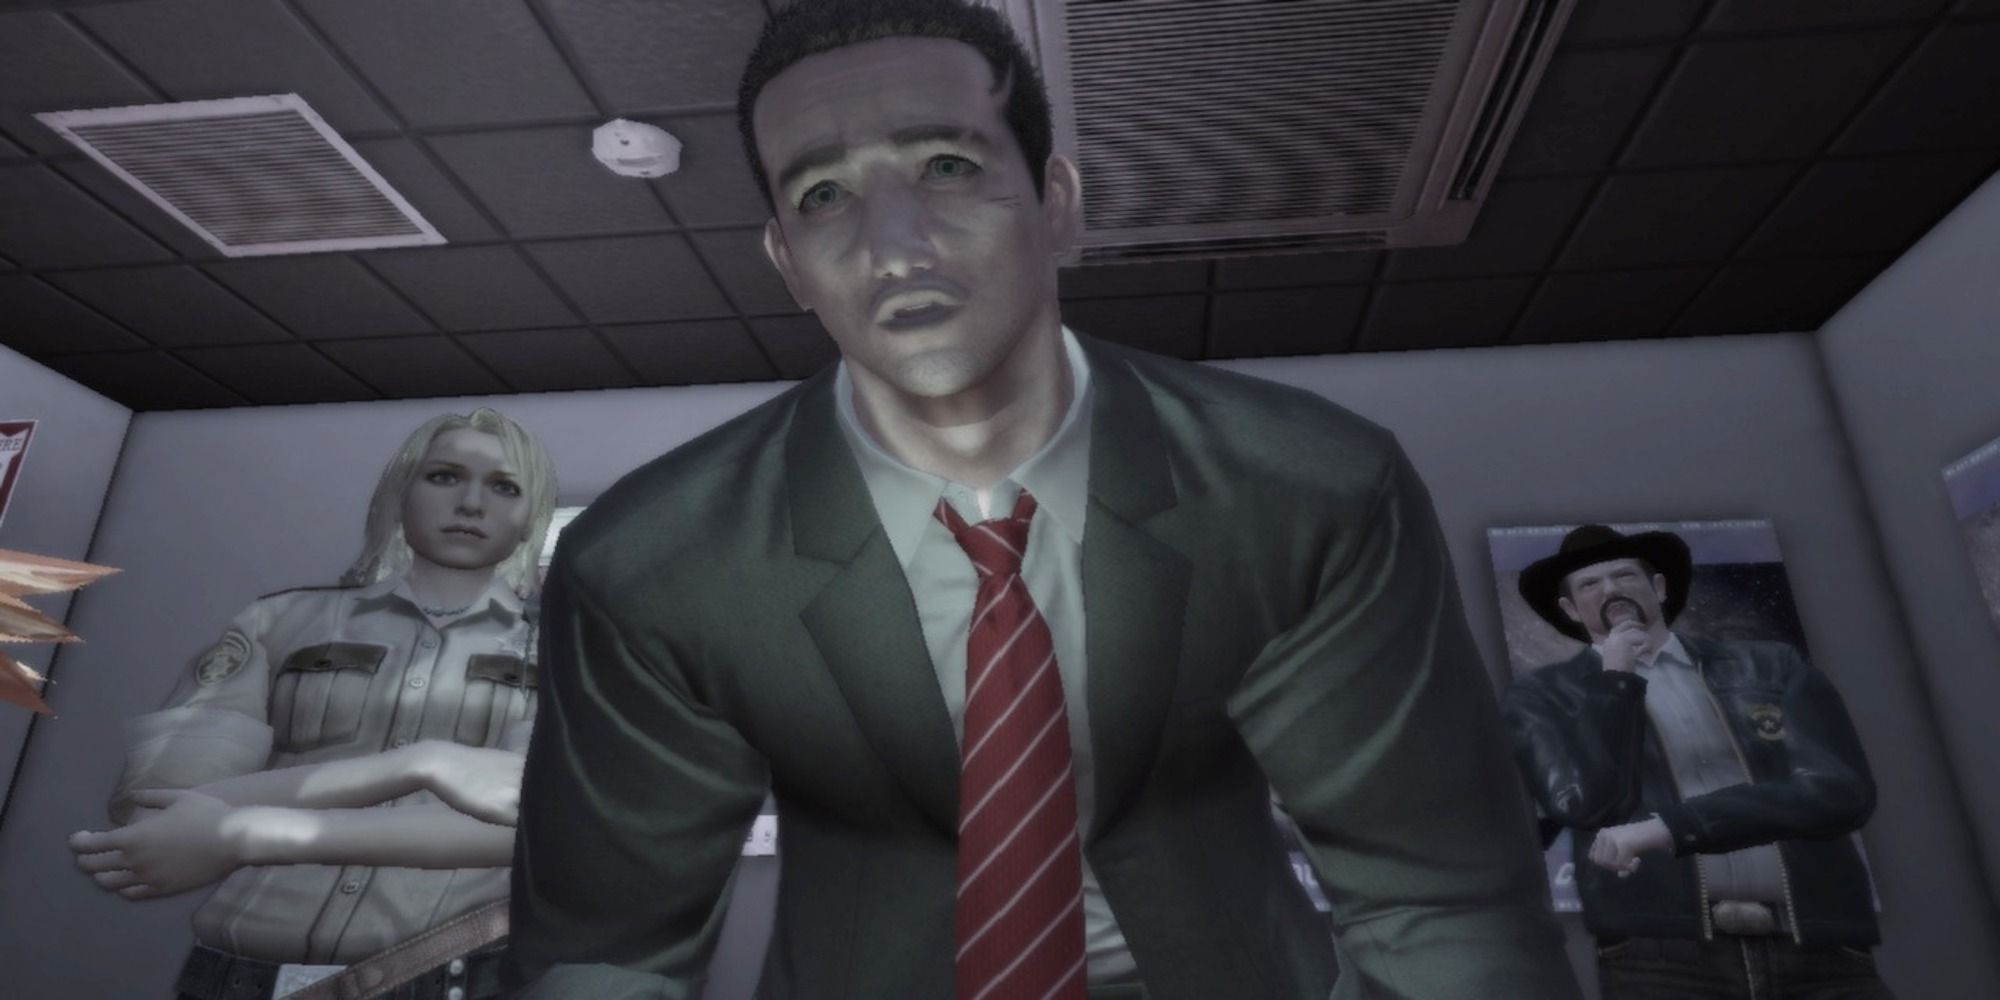 Gameplay from Deadly Premonition